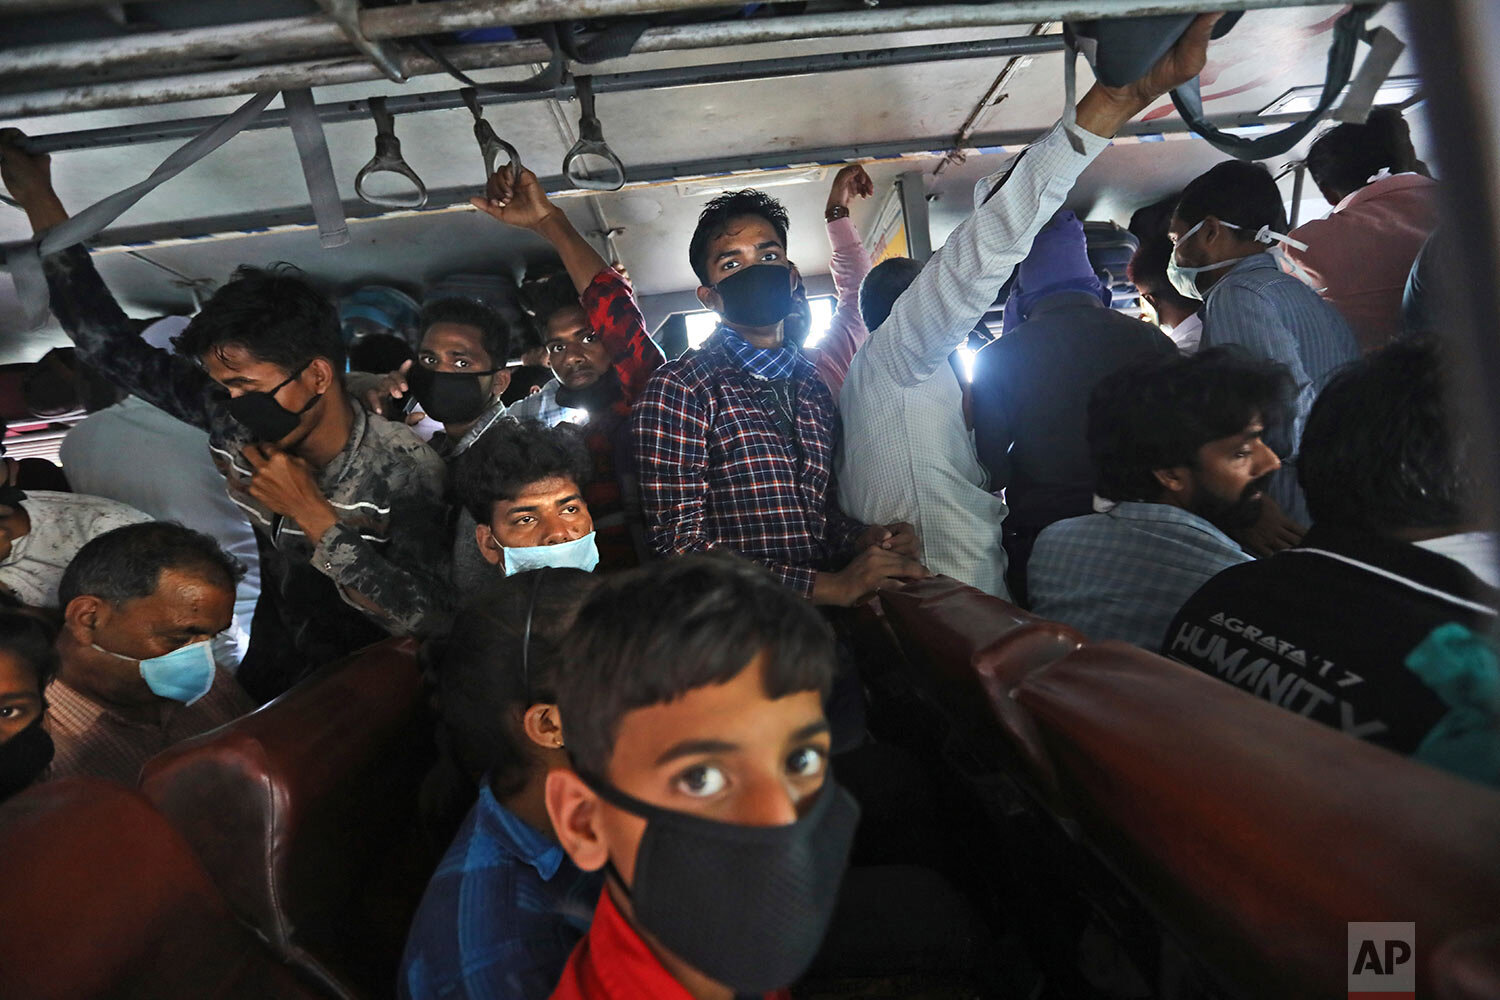  Migrant daily wage laborers crowd a bus as they travel to their respective hometowns following a lockdown amid concern over spread of coronavirus in New Delhi, India, Friday, March 27, 2020. (AP Photo/Manish Swarup) 